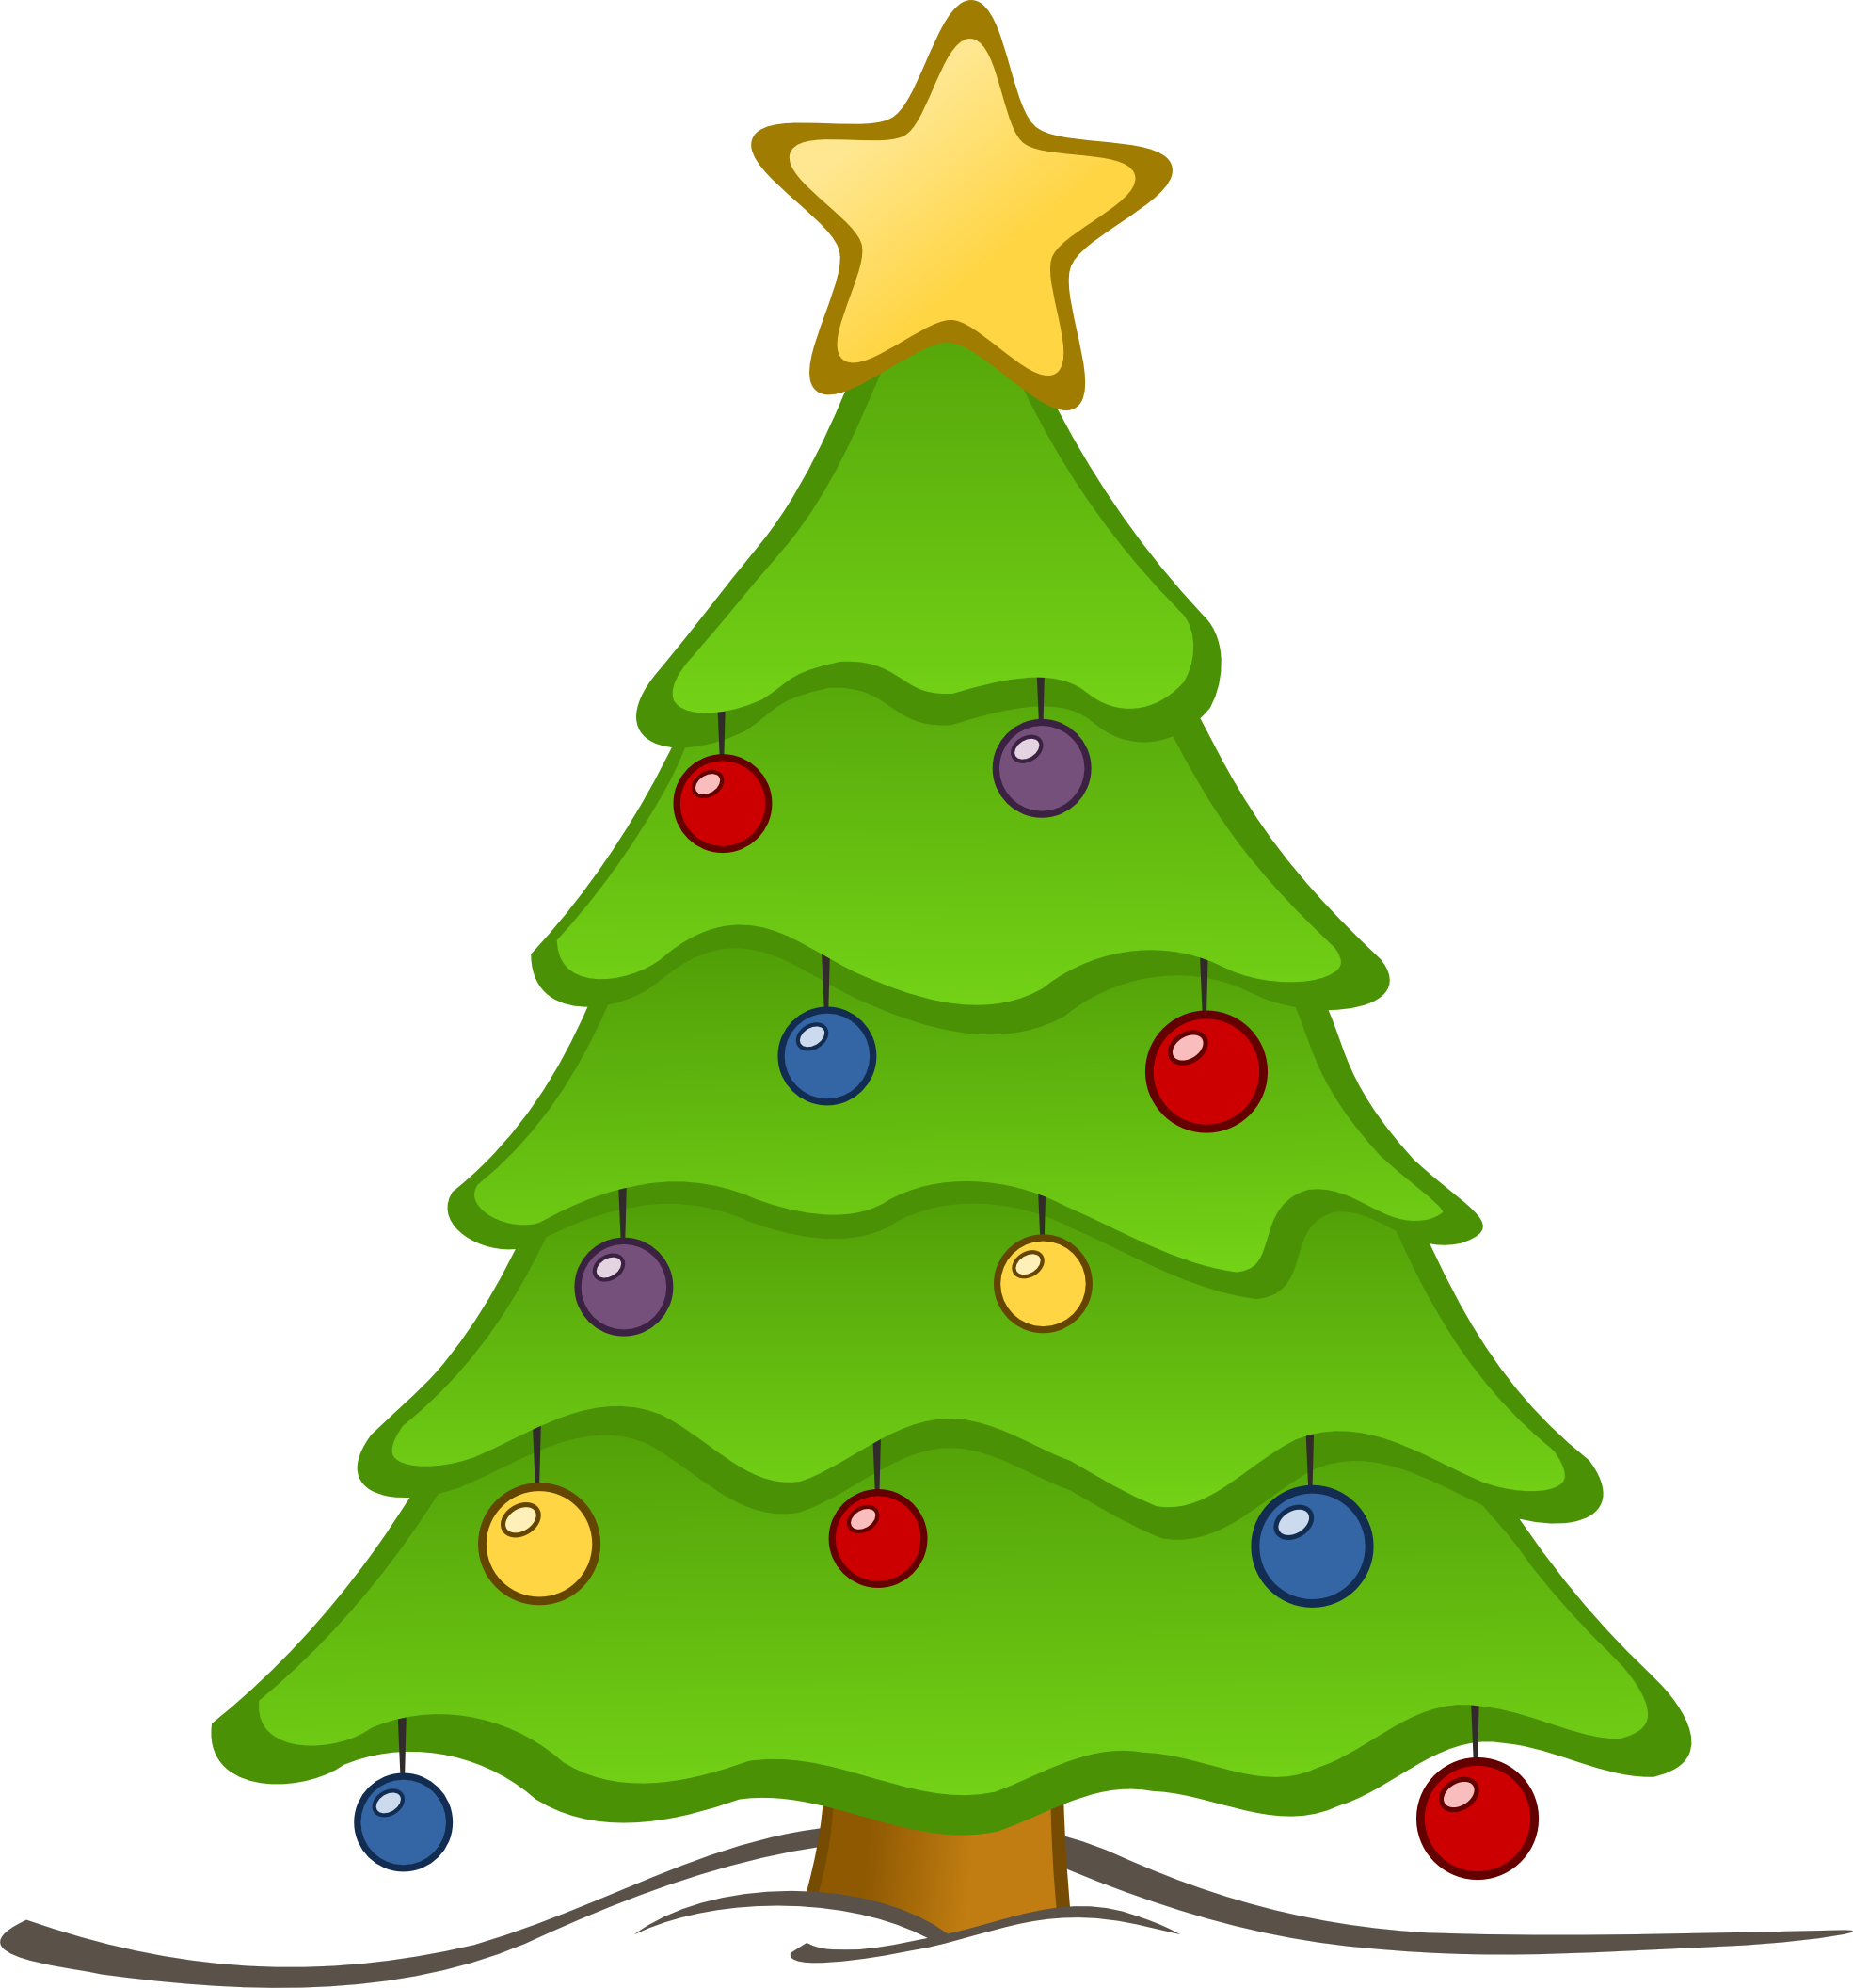 Christmas Tree Clip Art Free | Clipart library - Free Clipart Images